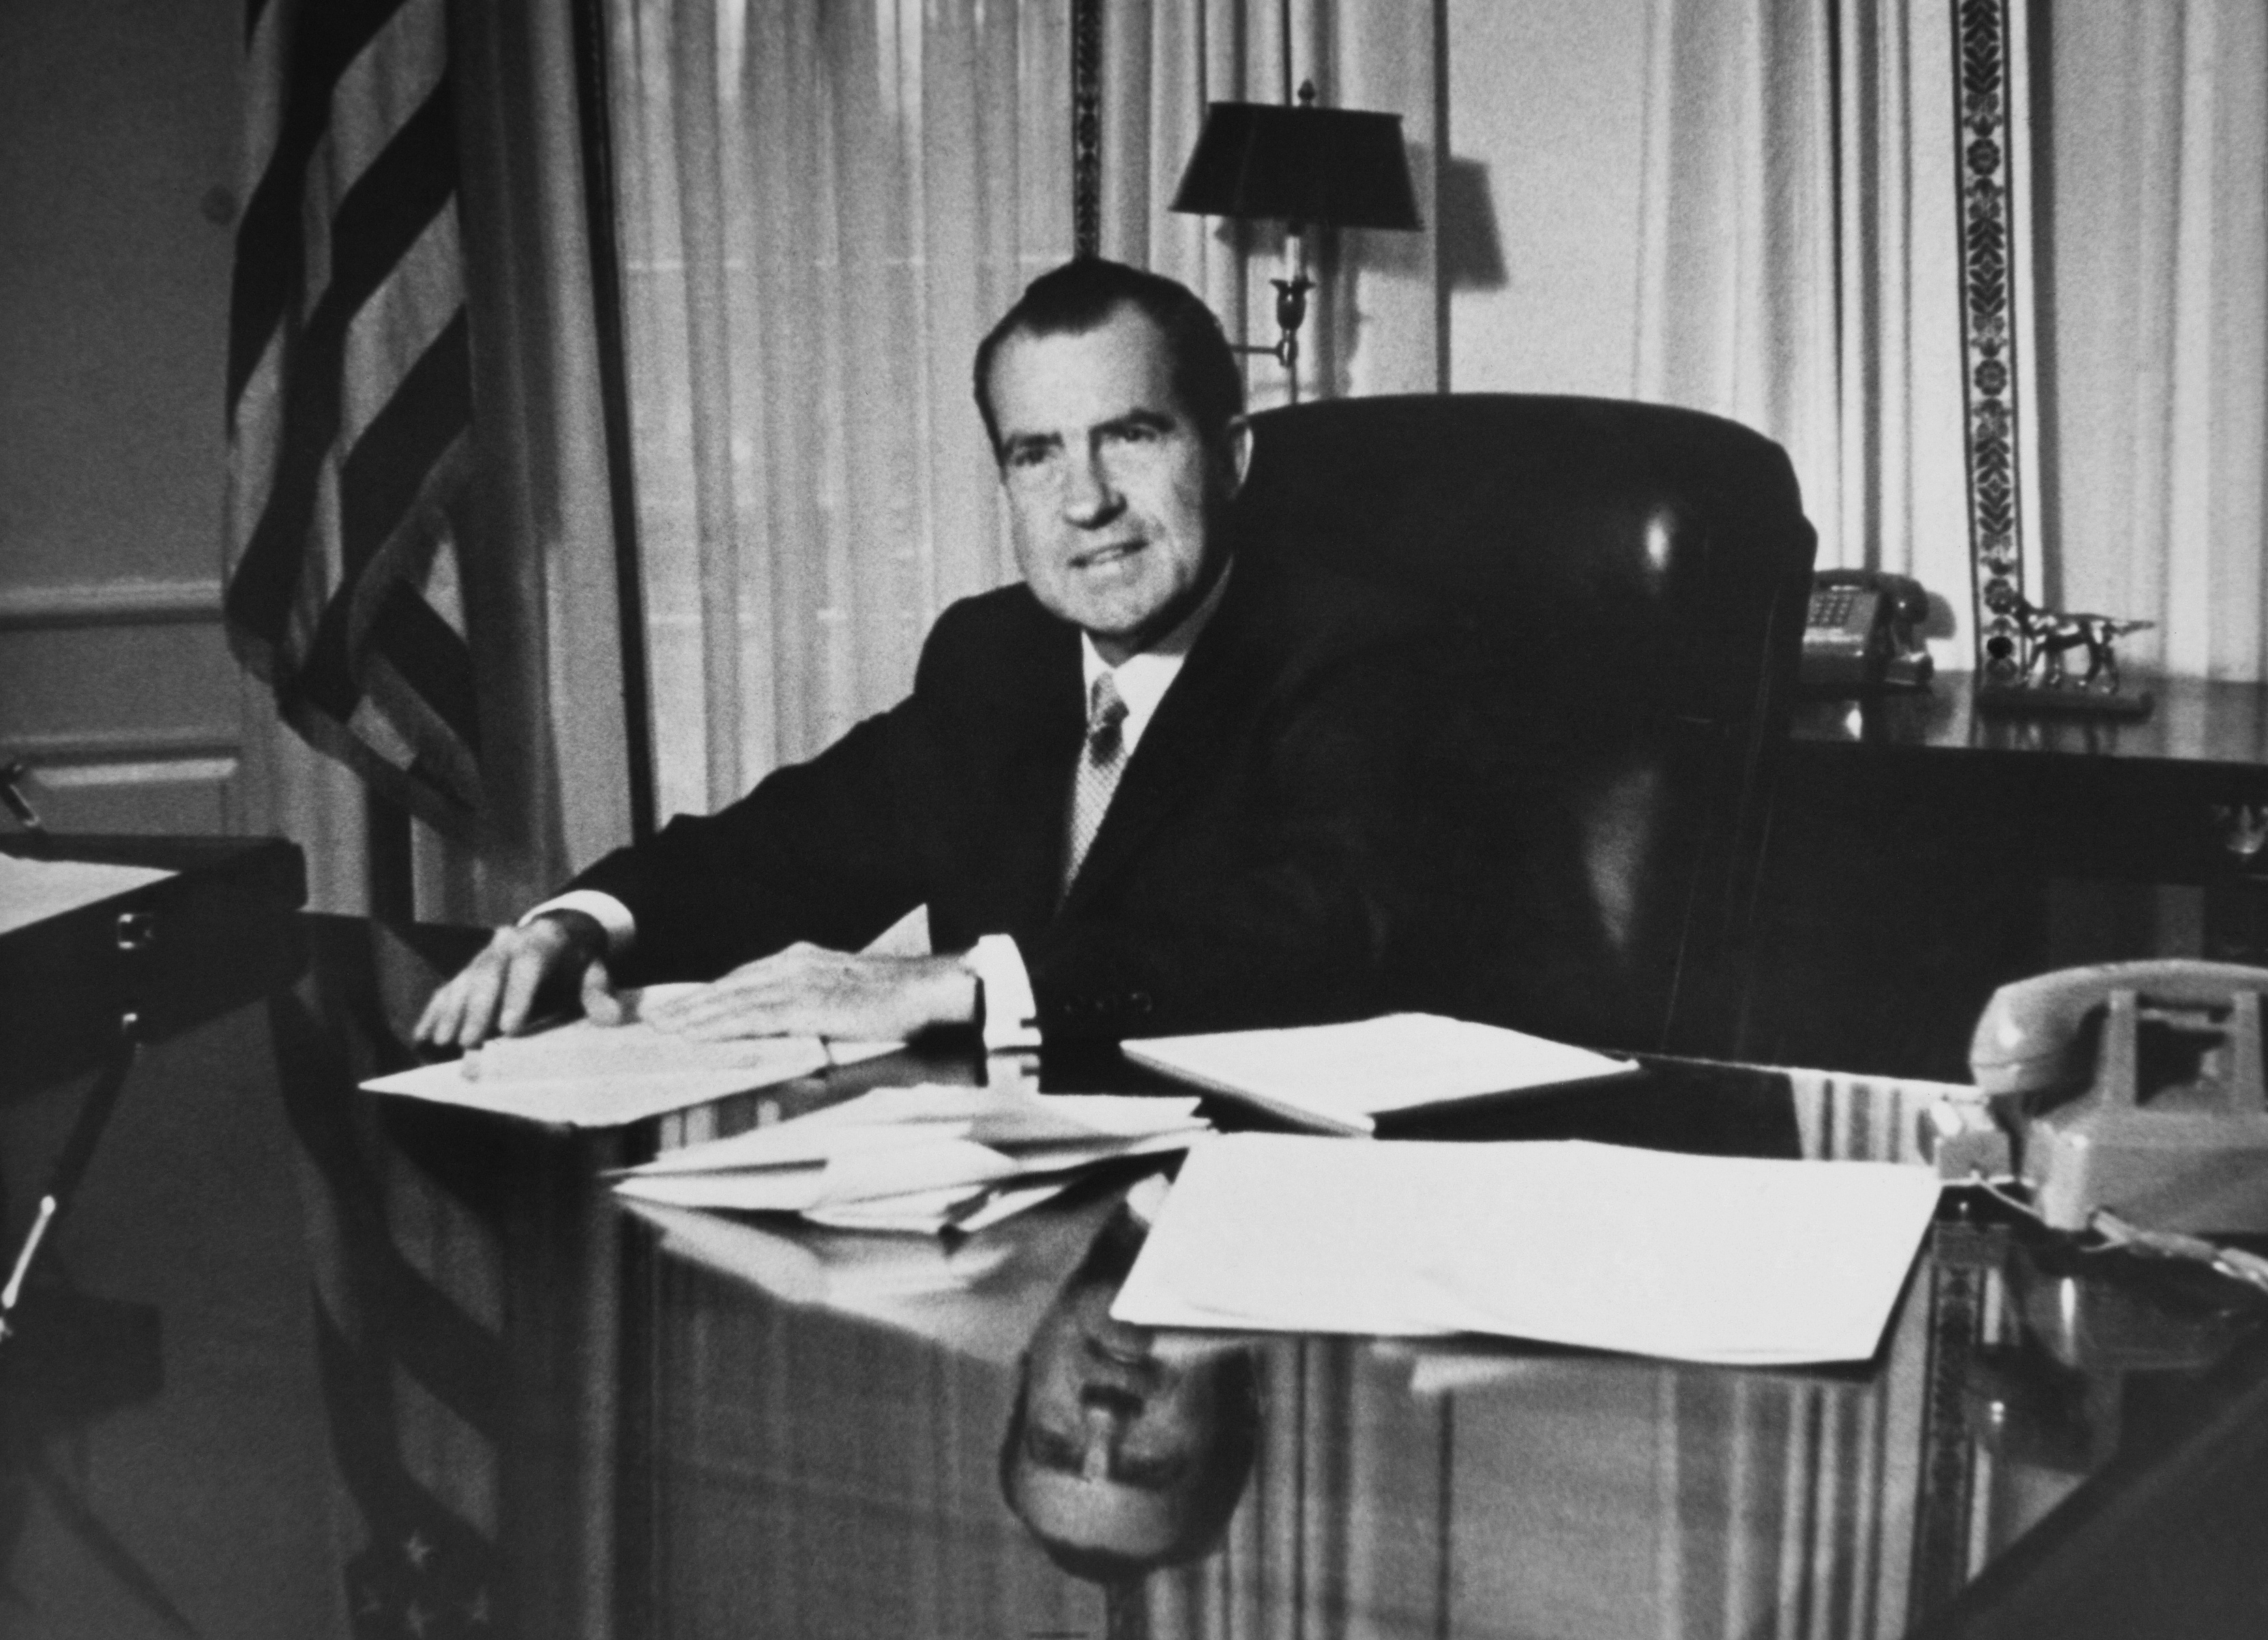 President Nixon at the White House in 1969 (Gamma-Keystone via Getty Images)